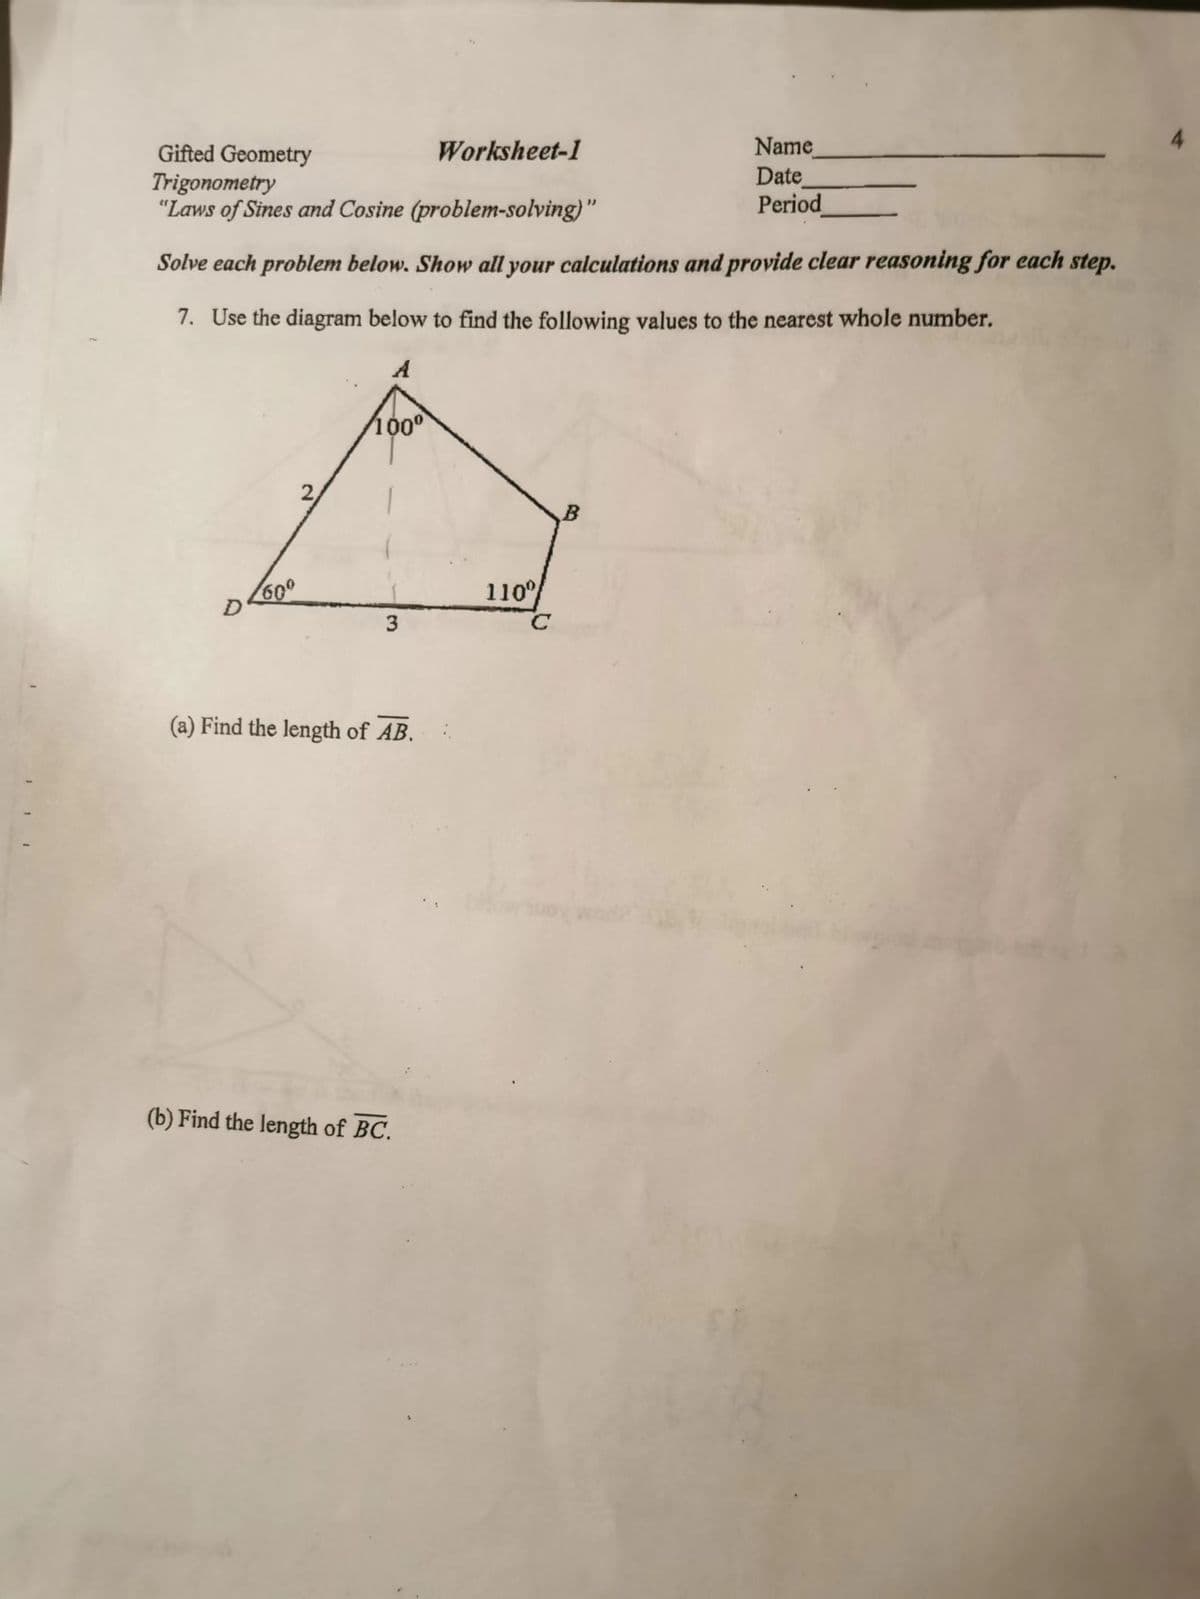 Name
Date
Worksheet-1
Gifted Geometry
Trigonometry
"Laws of Sines and Cosine (problem-solving)"
Period
Solve each problem below. Show all your calculations and provide clear reasoning for each step.
7. Use the diagram below to find the following values to the nearest whole number.
A
100
110
(a) Find the length of AB.
(b) Find the length of BC.
